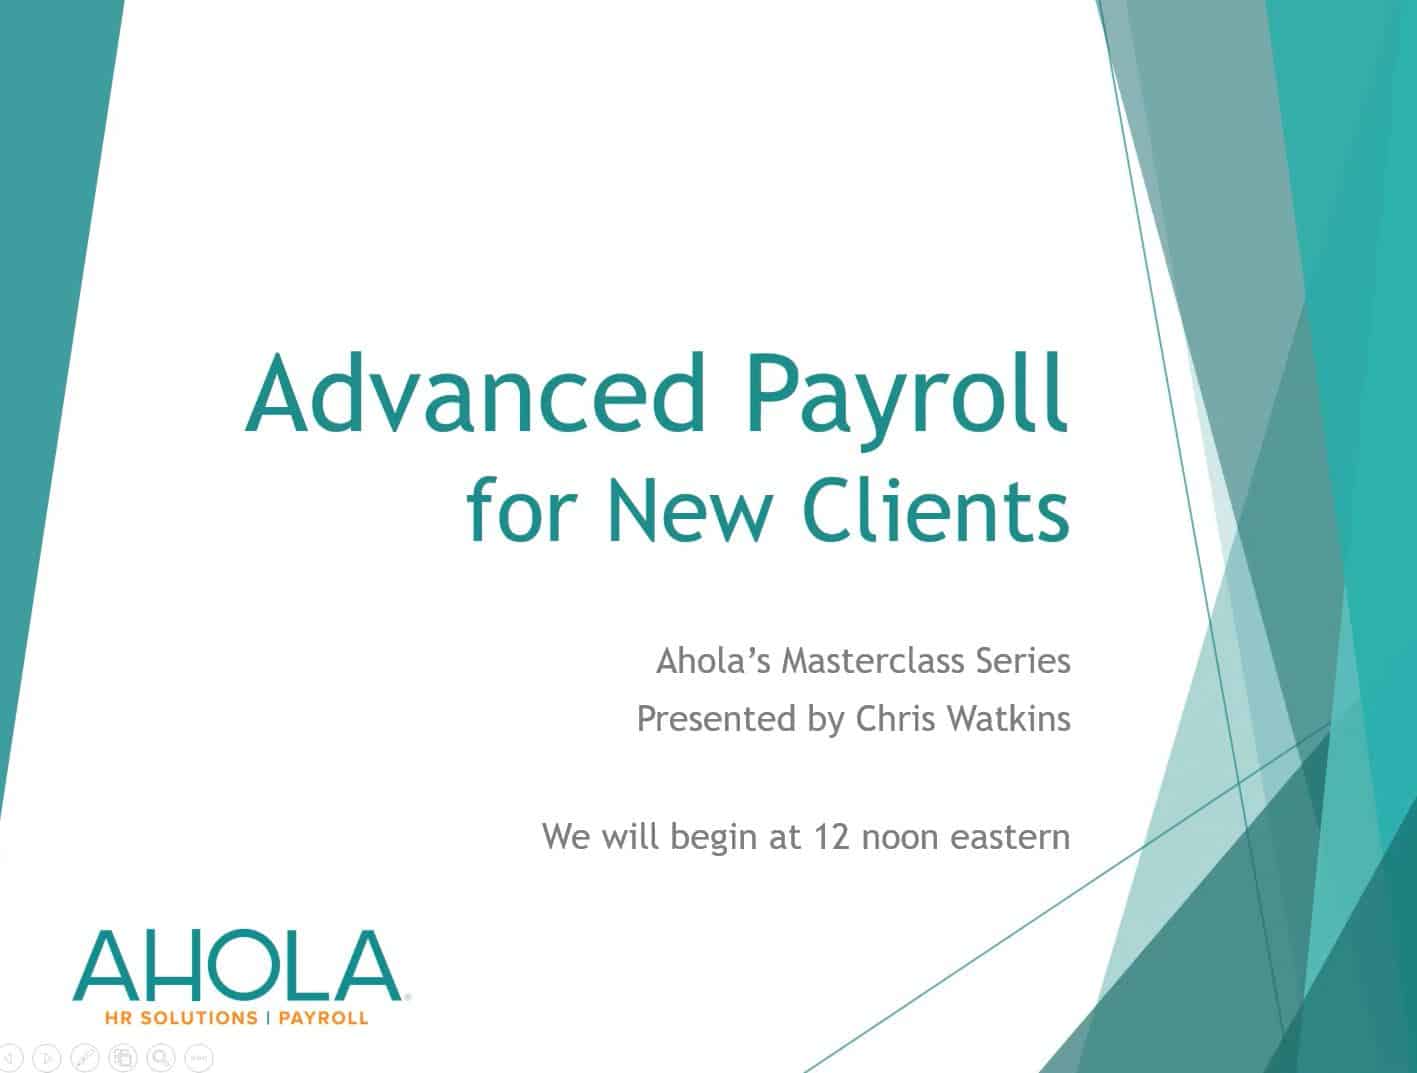 Advanced Payroll for New Clients